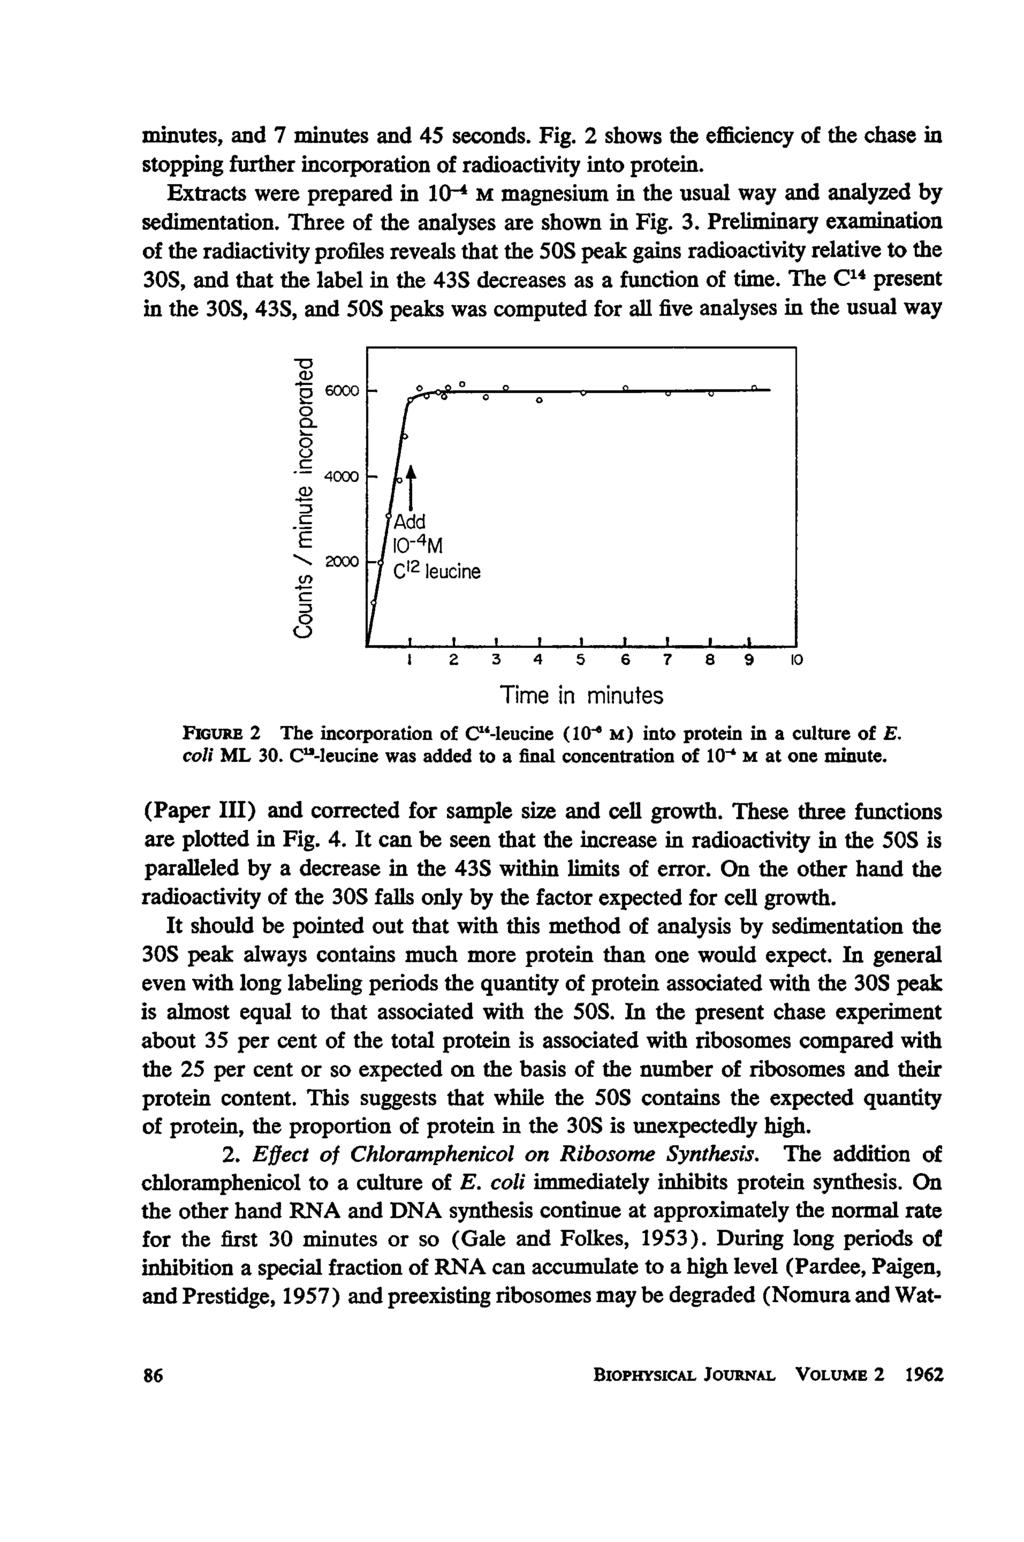 minutes, and 7 minutes and 45 seconds. Fig. 2 shows the efficiency of the chase in stopping further incorporation of radioactivity into protein.